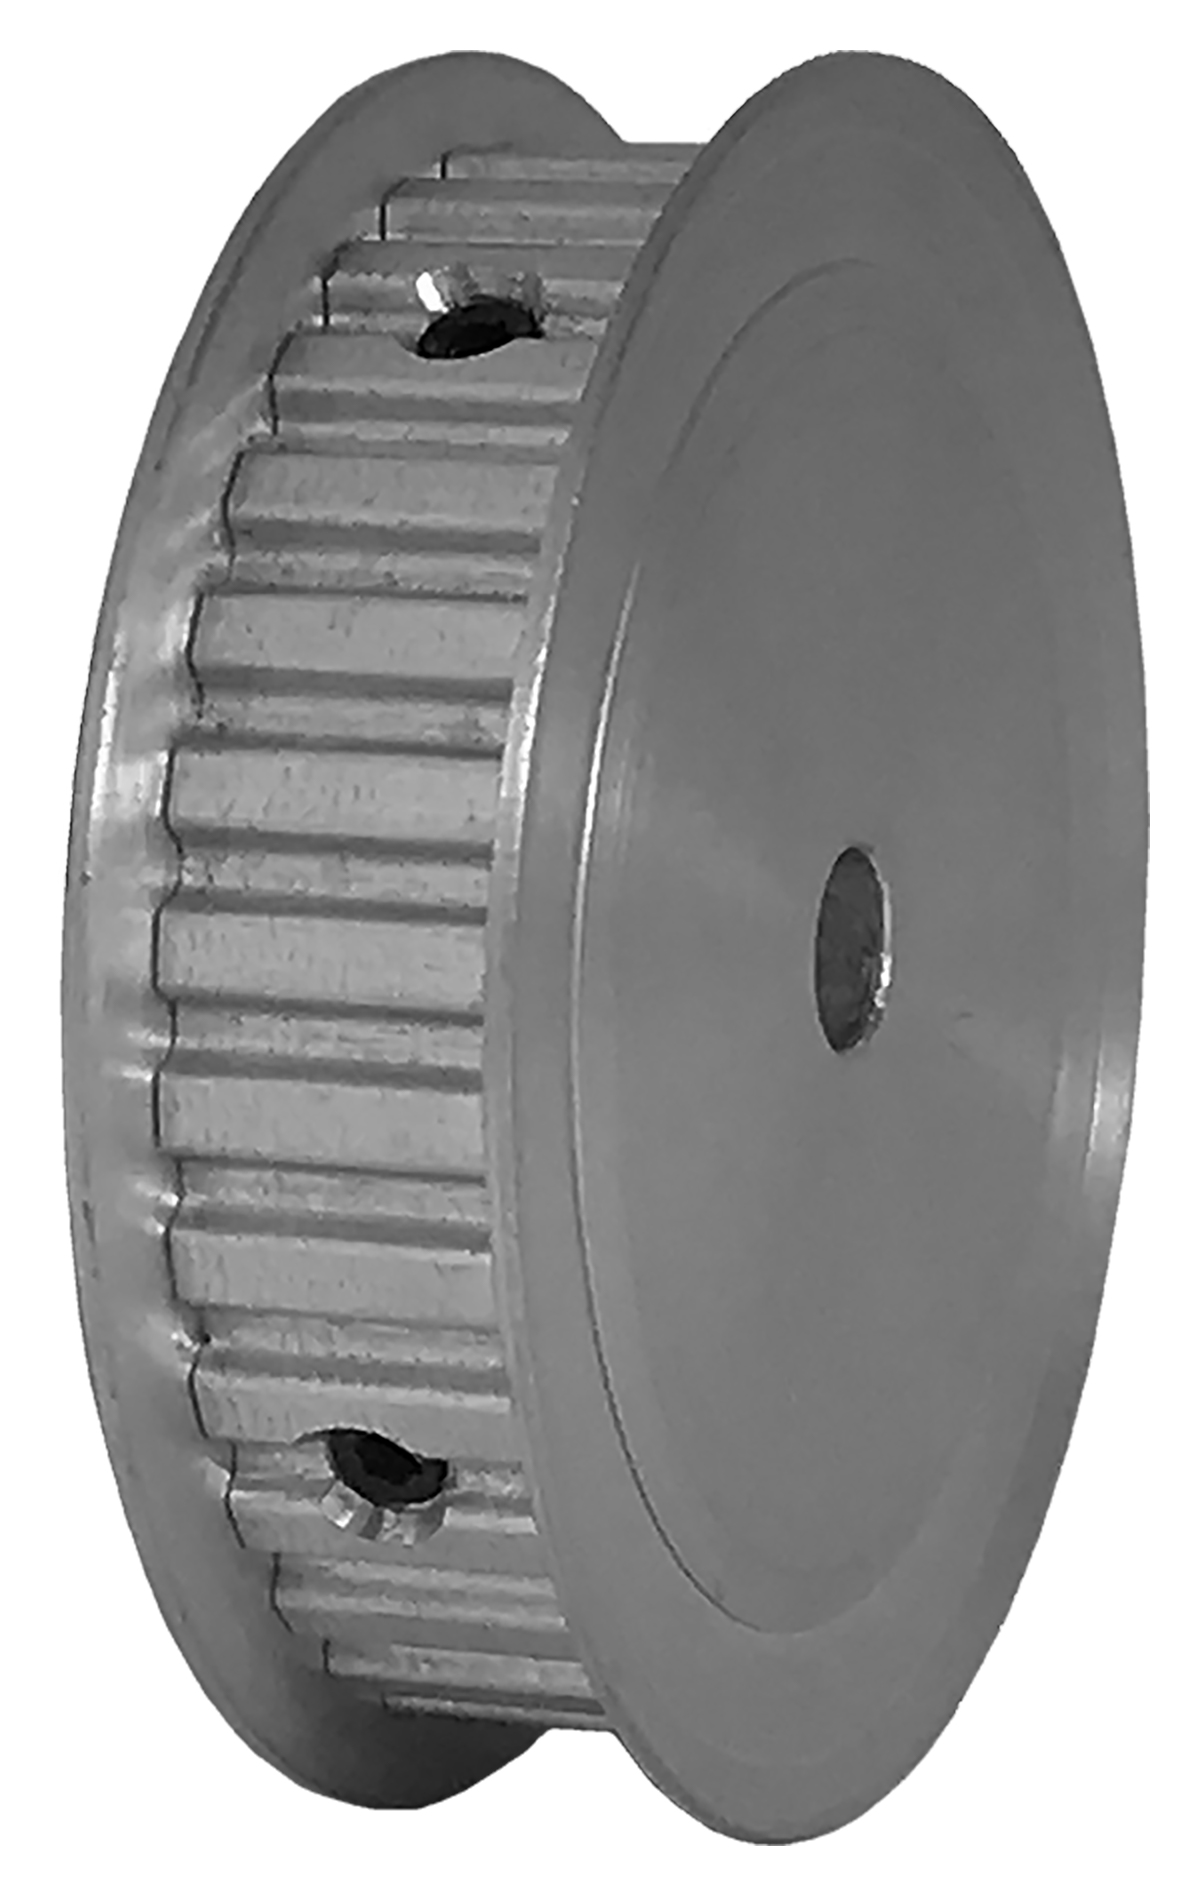 32XL037-3FA3 - Aluminum Imperial Pitch Pulleys